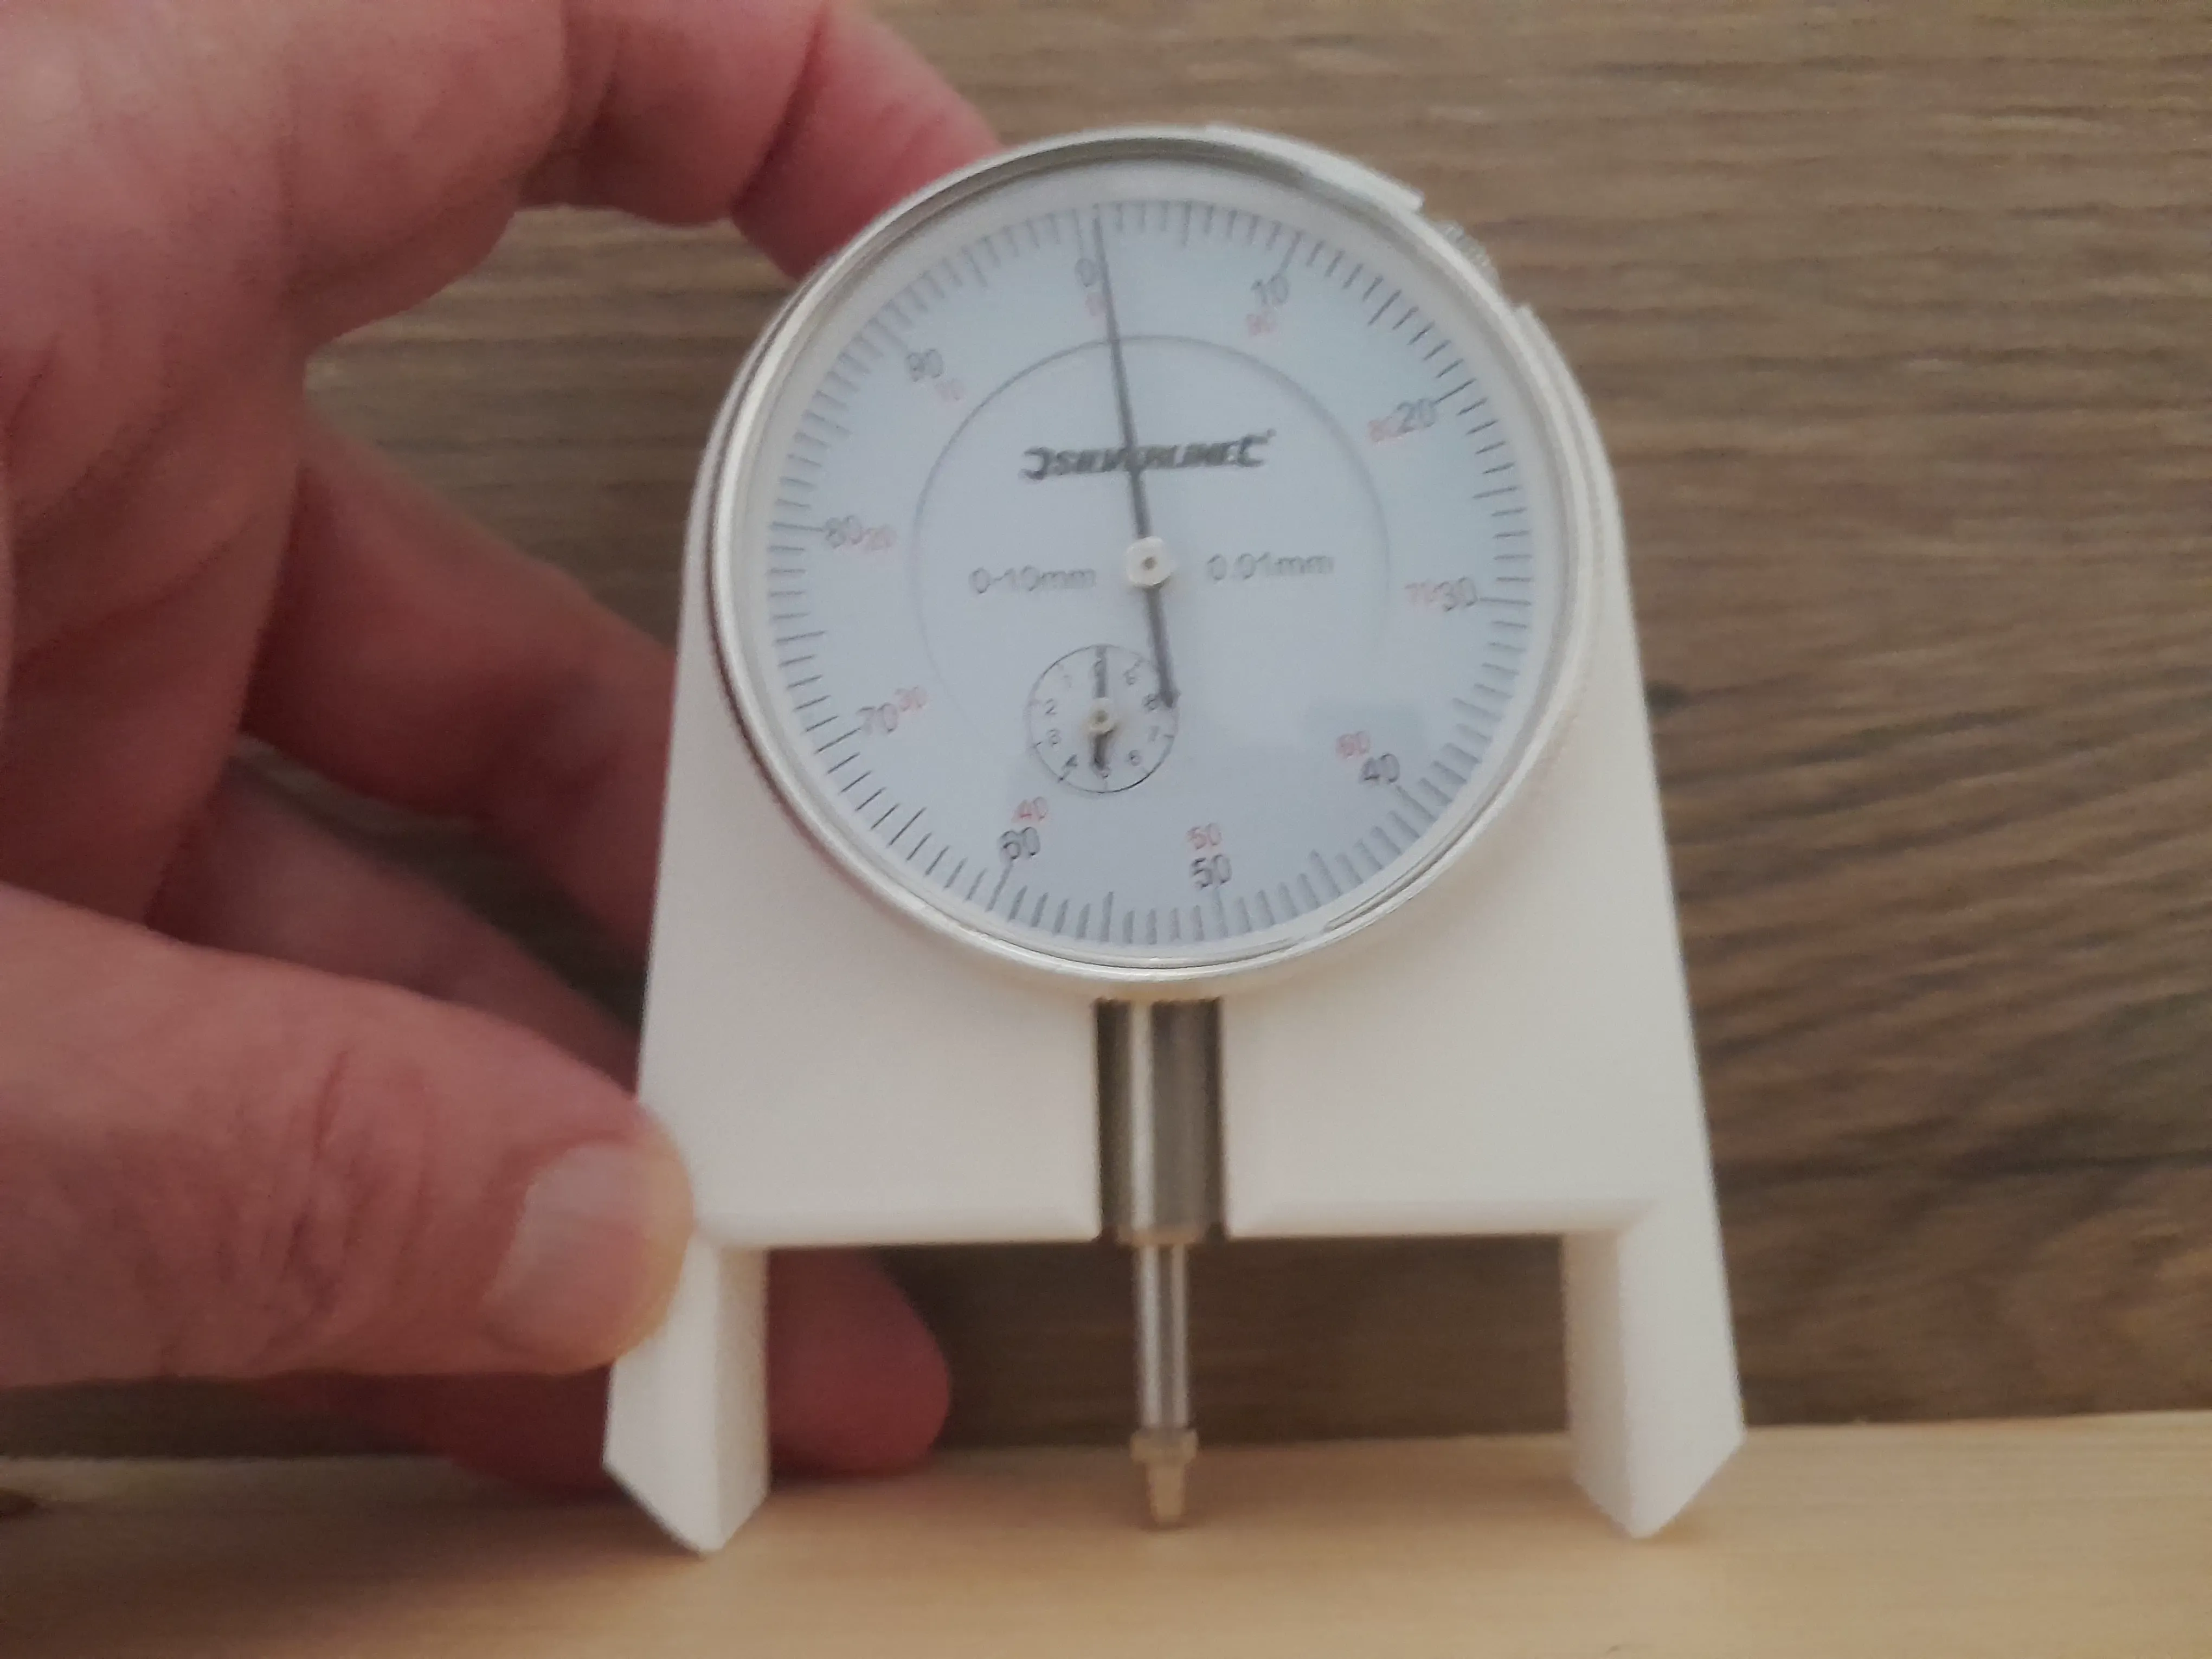 Thichness gauge comparator 60mm